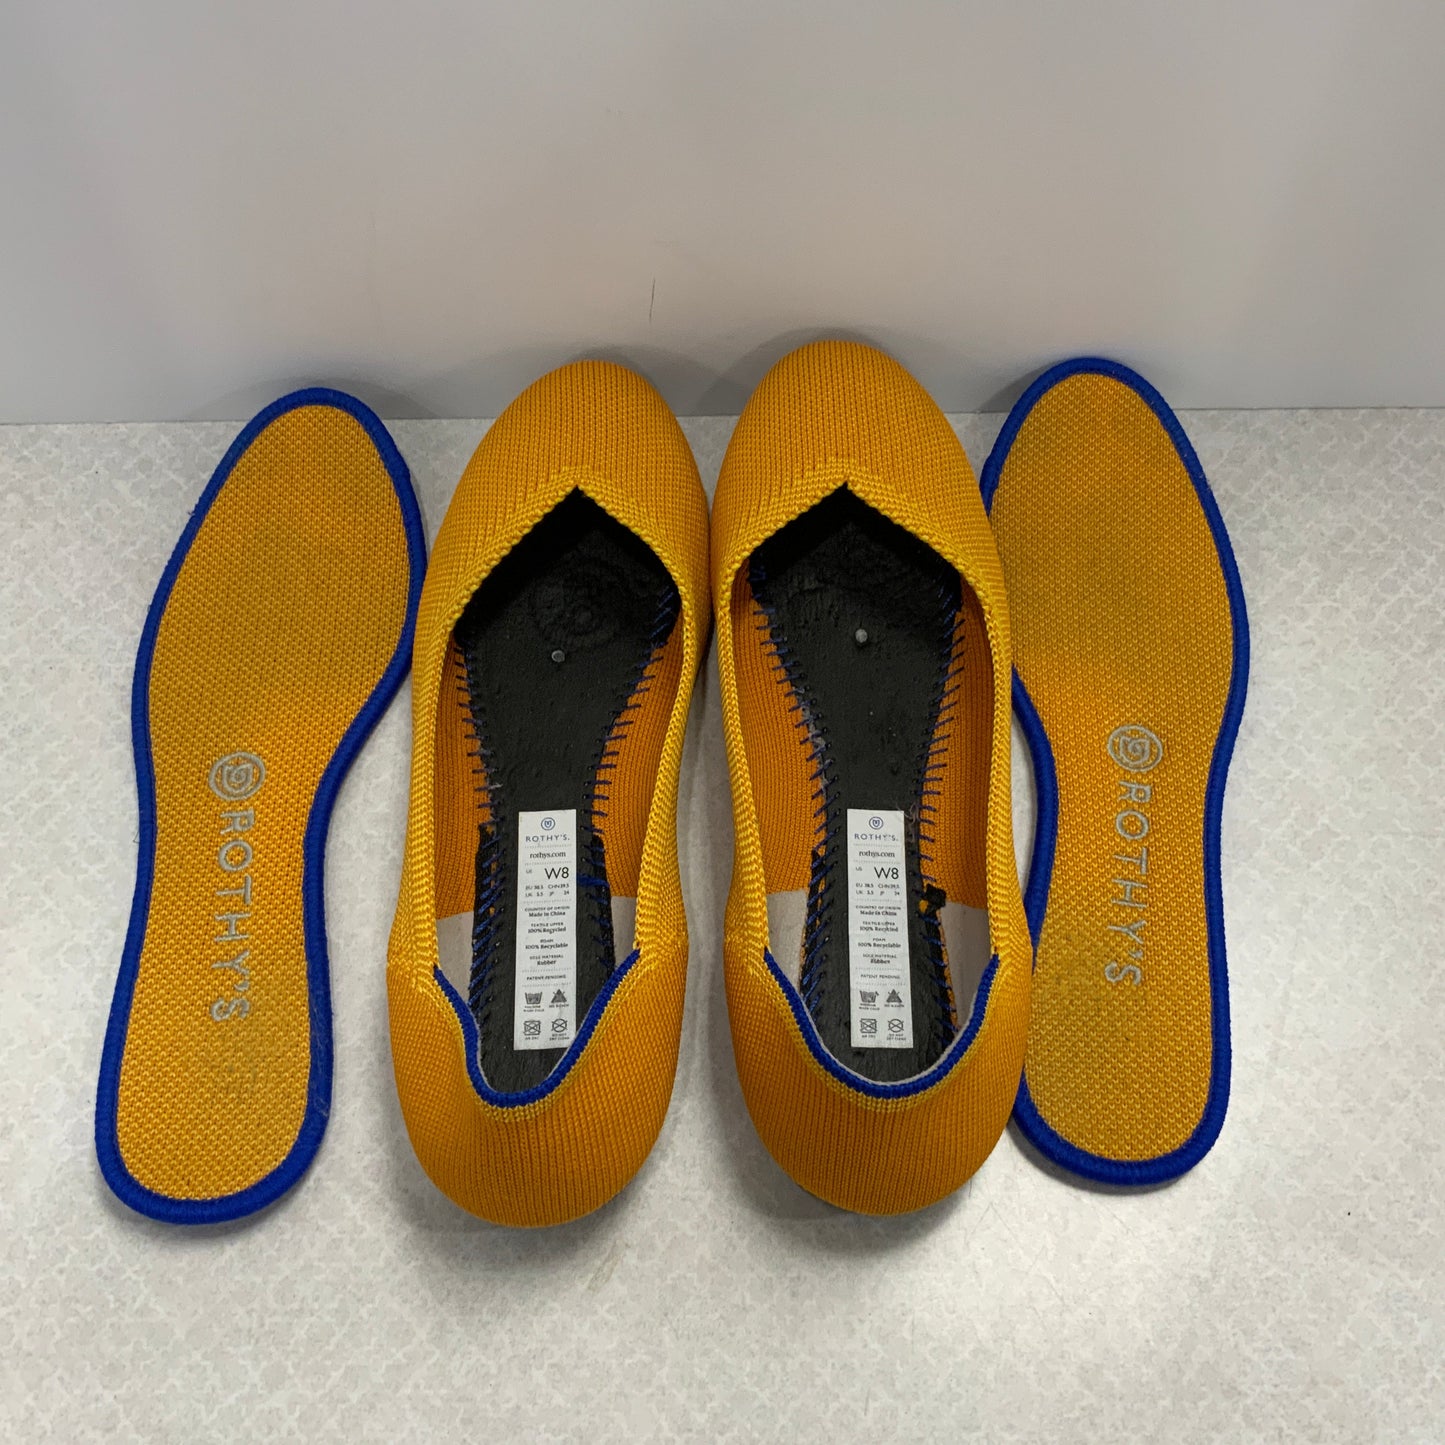 Yellow Shoes Flats Rothys, Size 8